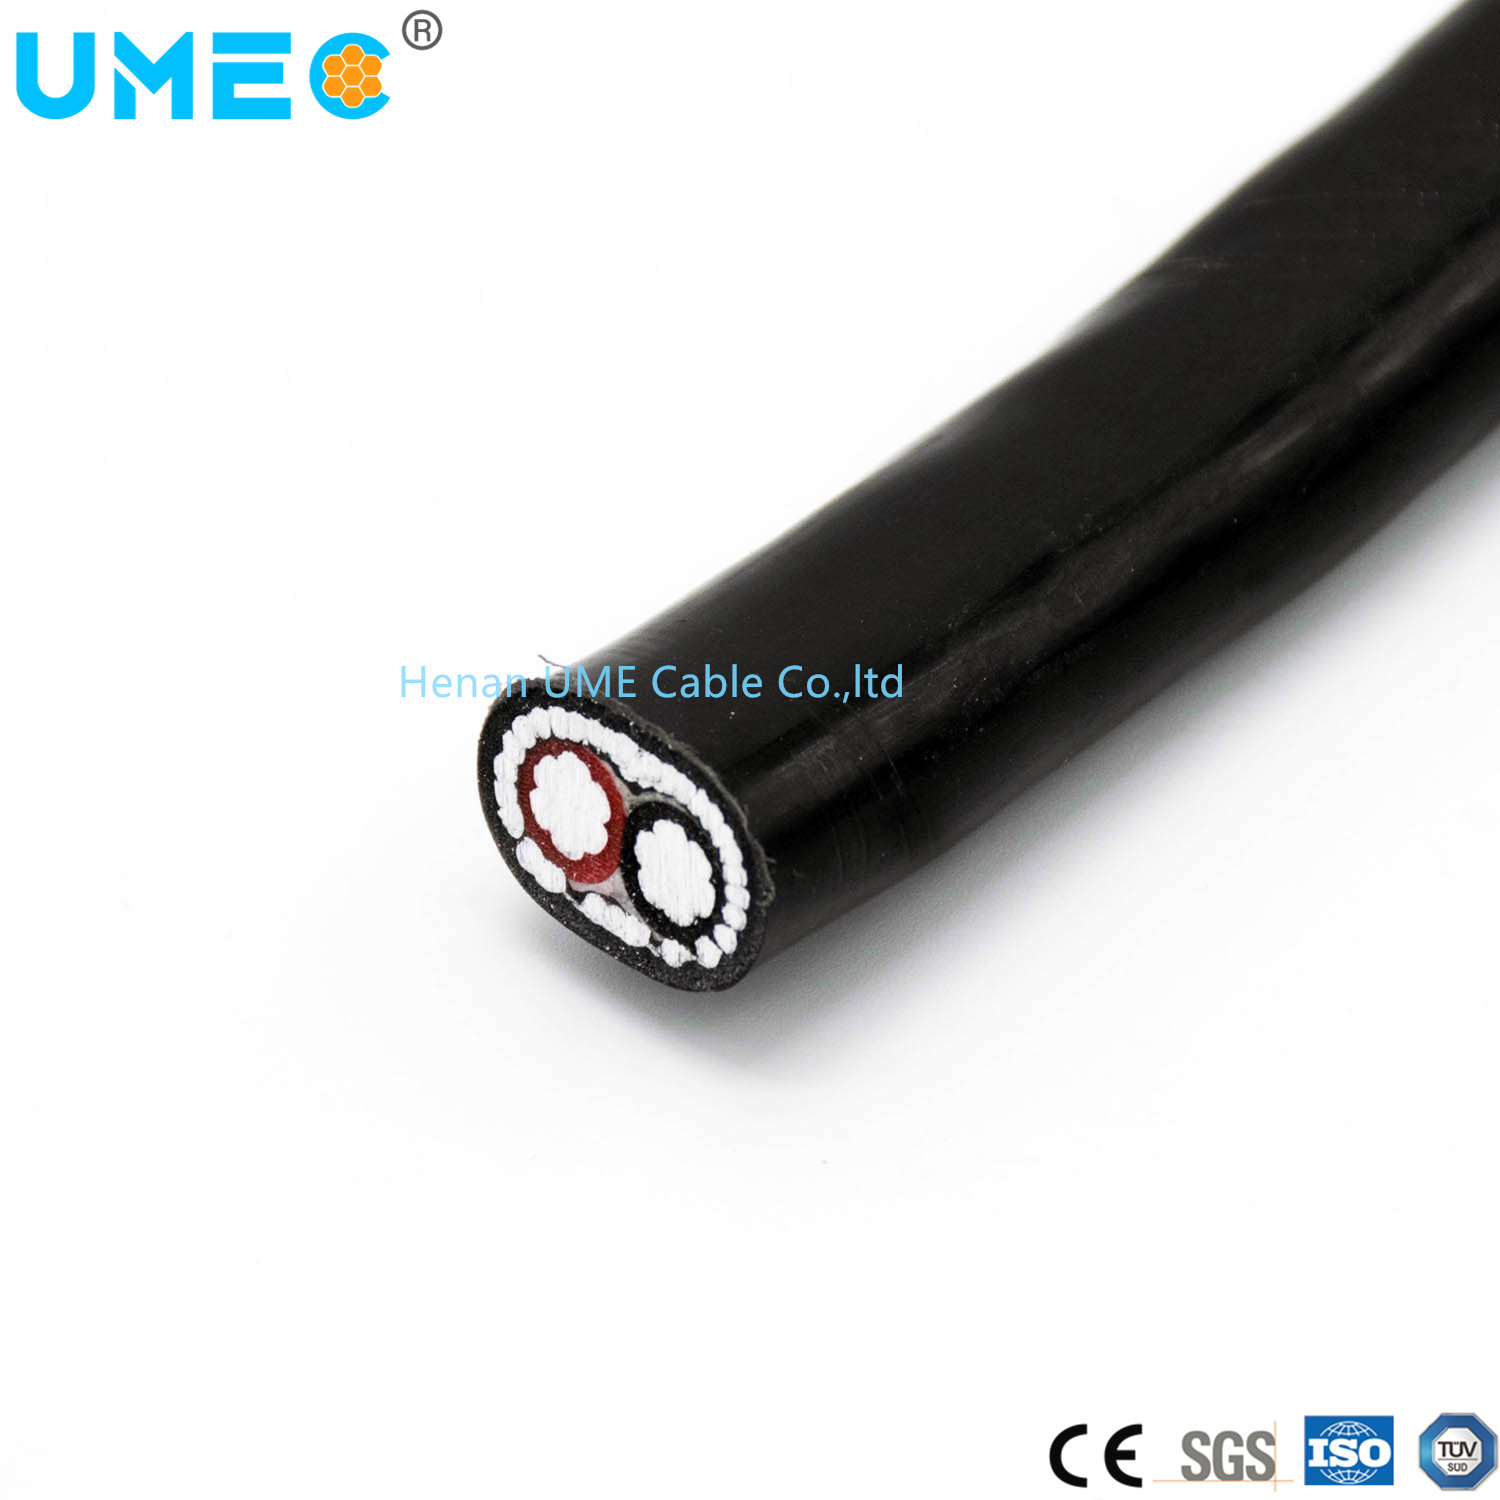 Service Entrance Cable 2/3cores 2X8 2X10 3X6 3X8 AWG Concentric Cable